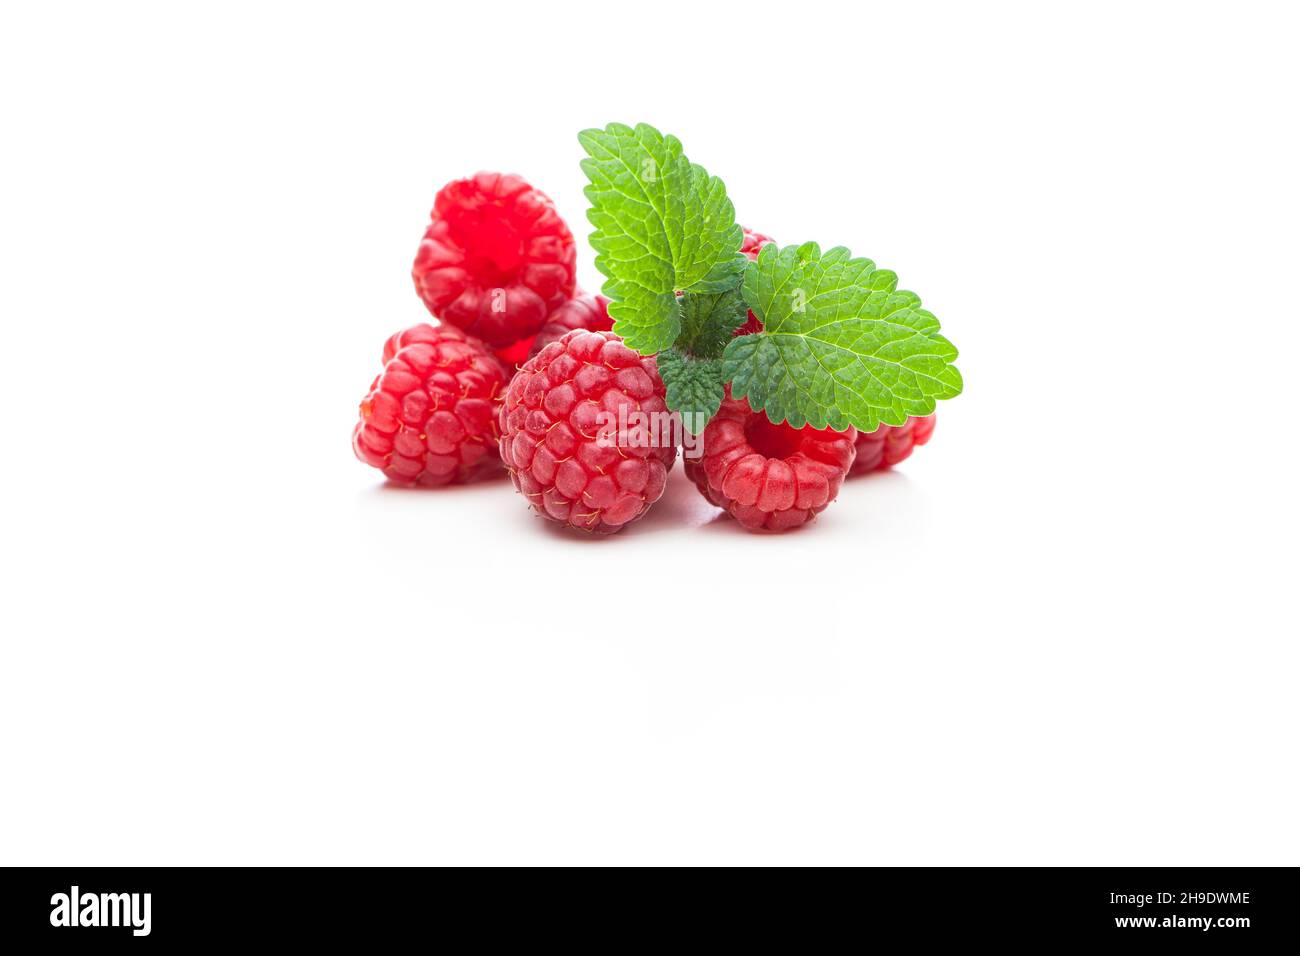 raspberries, mint, fruit, red, green, leaf, fresh, raspberry, fruits, leaves, more, details, food, fruity, light, bright, background, berries, berry, Stock Photo